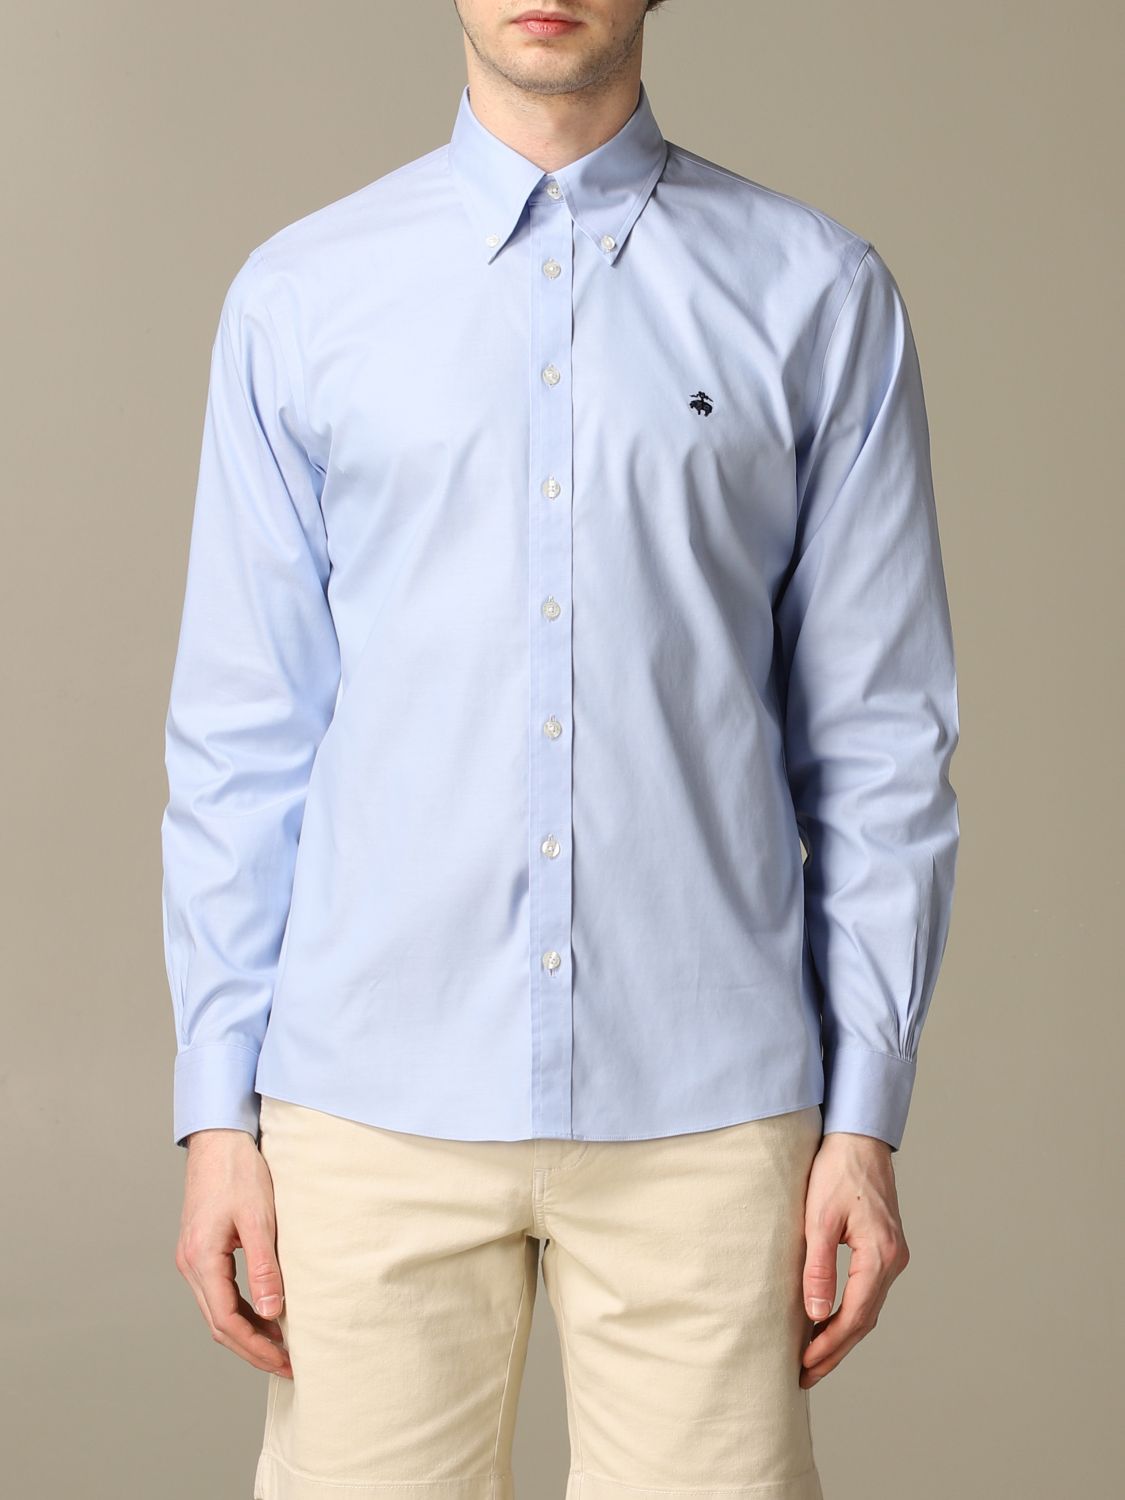 brooks brothers outlet shirts